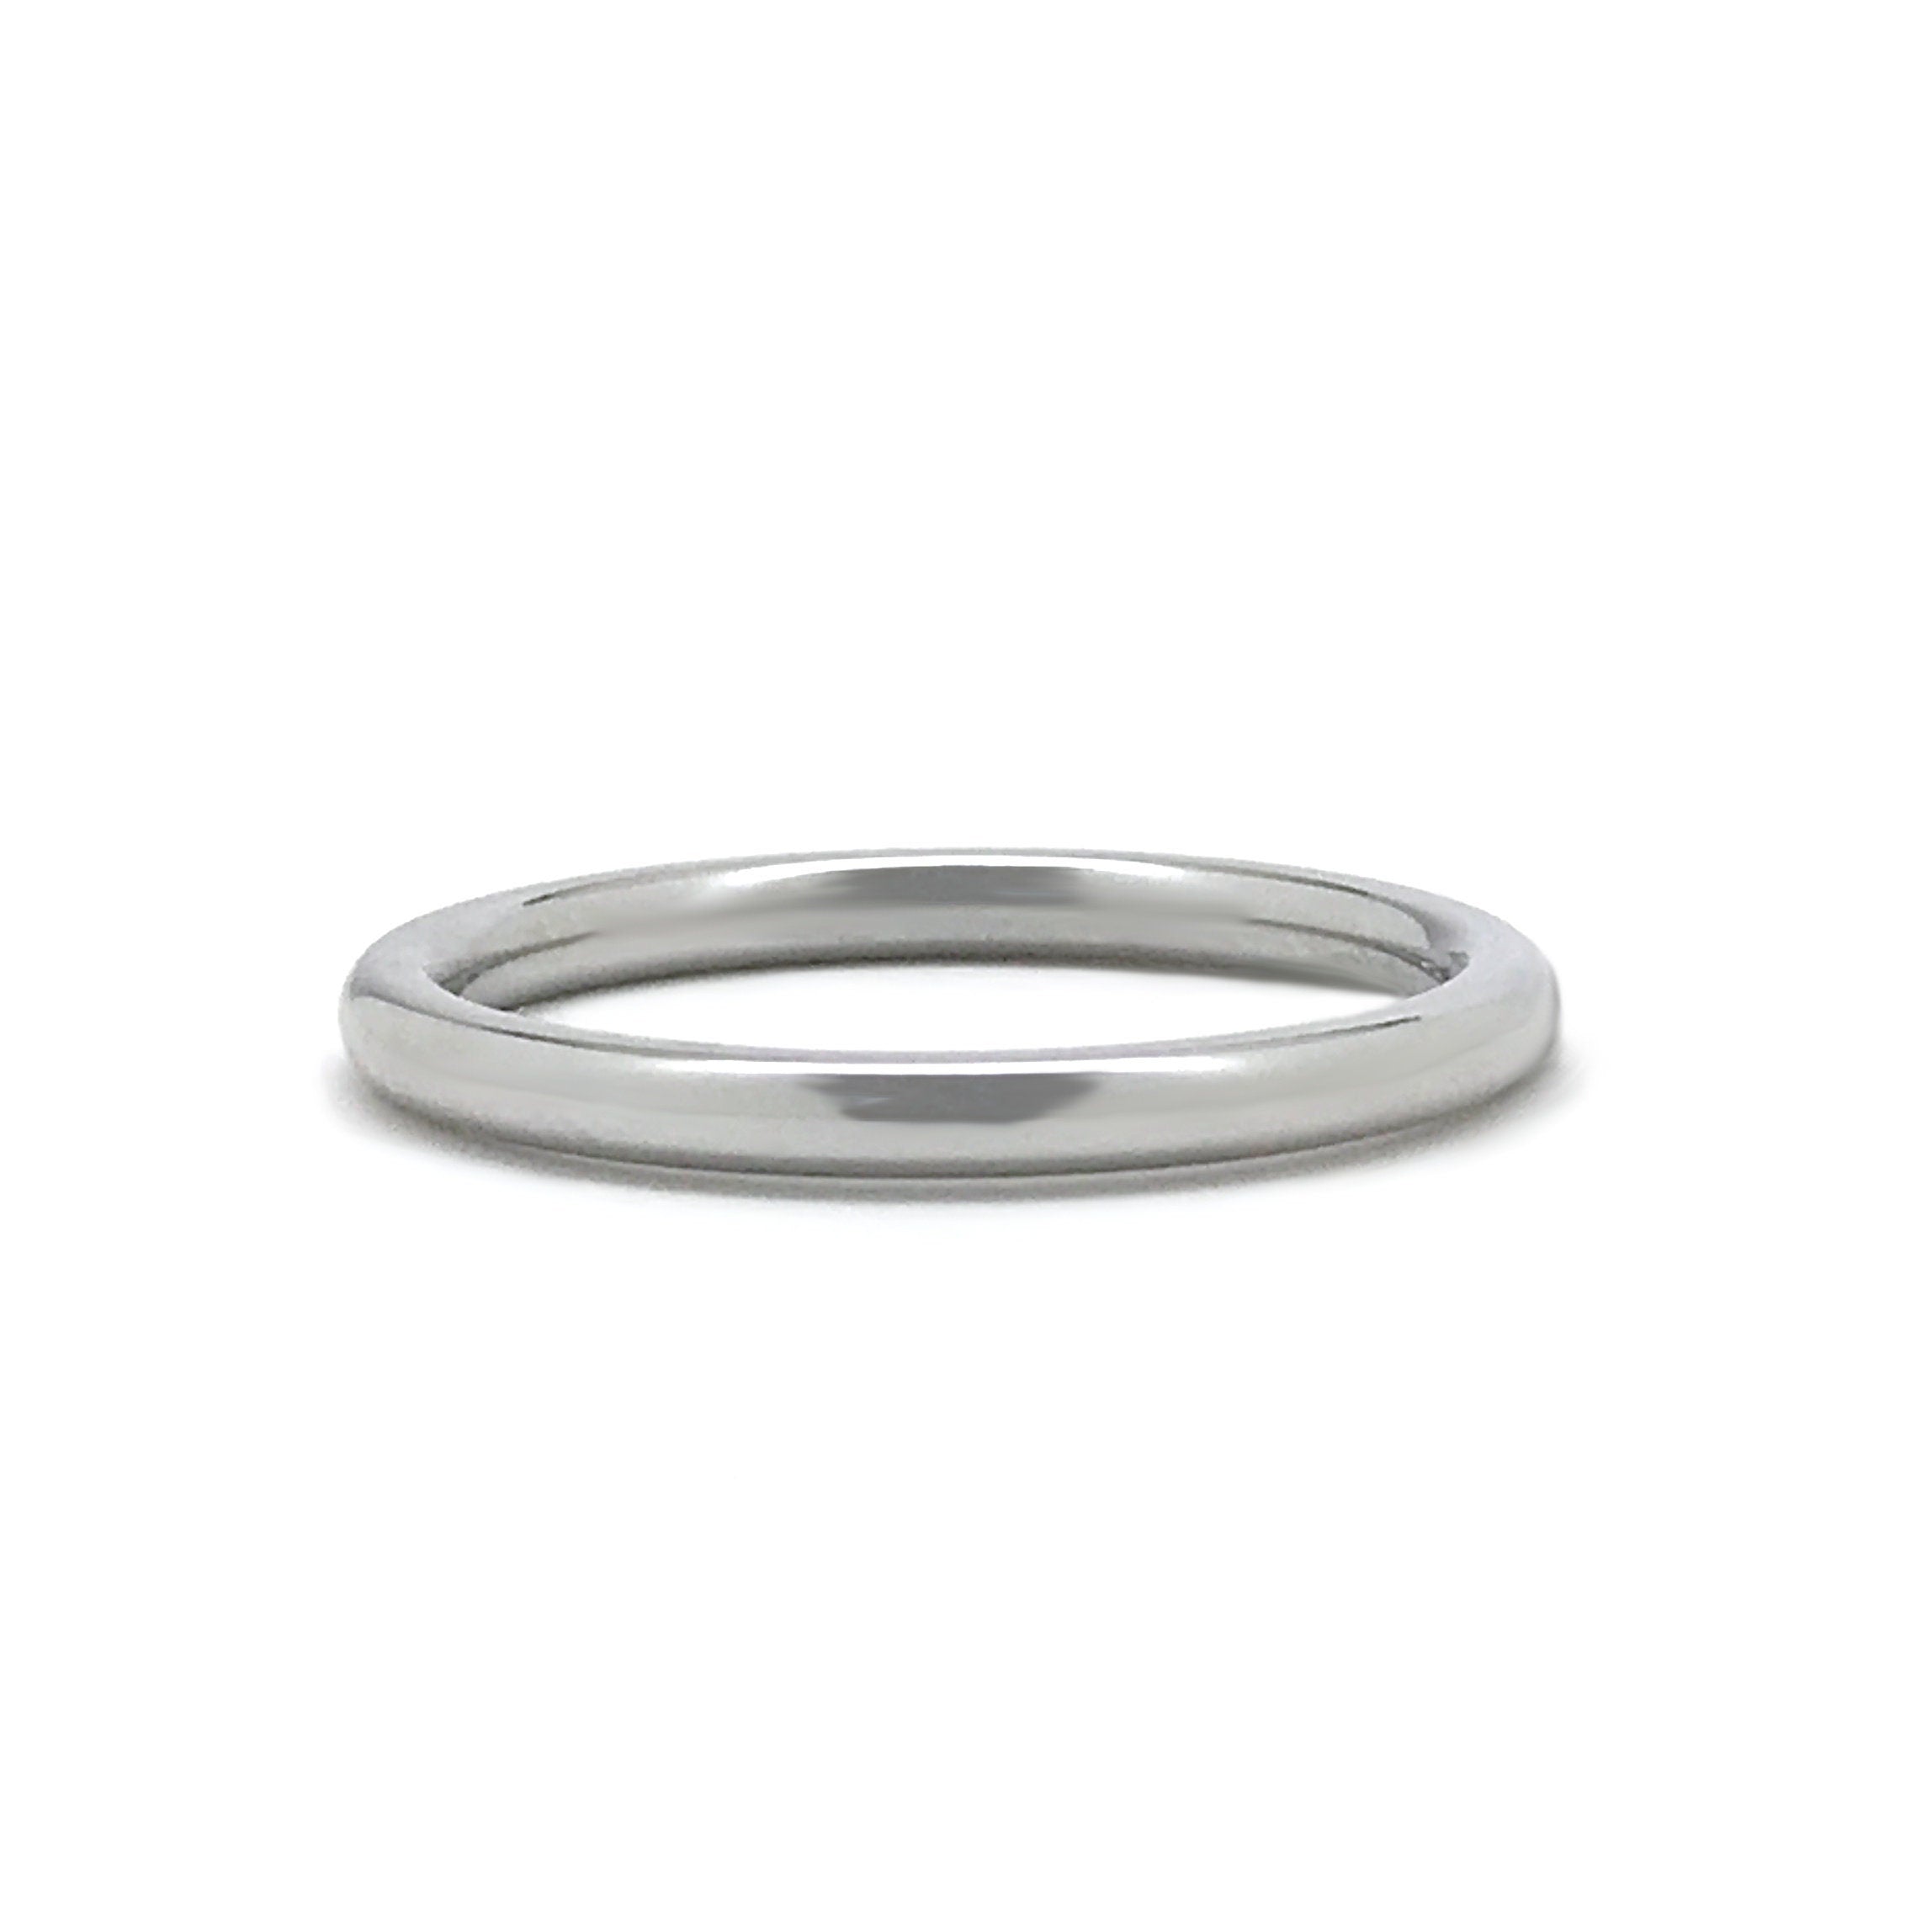 Unisex Stainless Steel Ring Lovers Simple Plain Band India | Ubuy